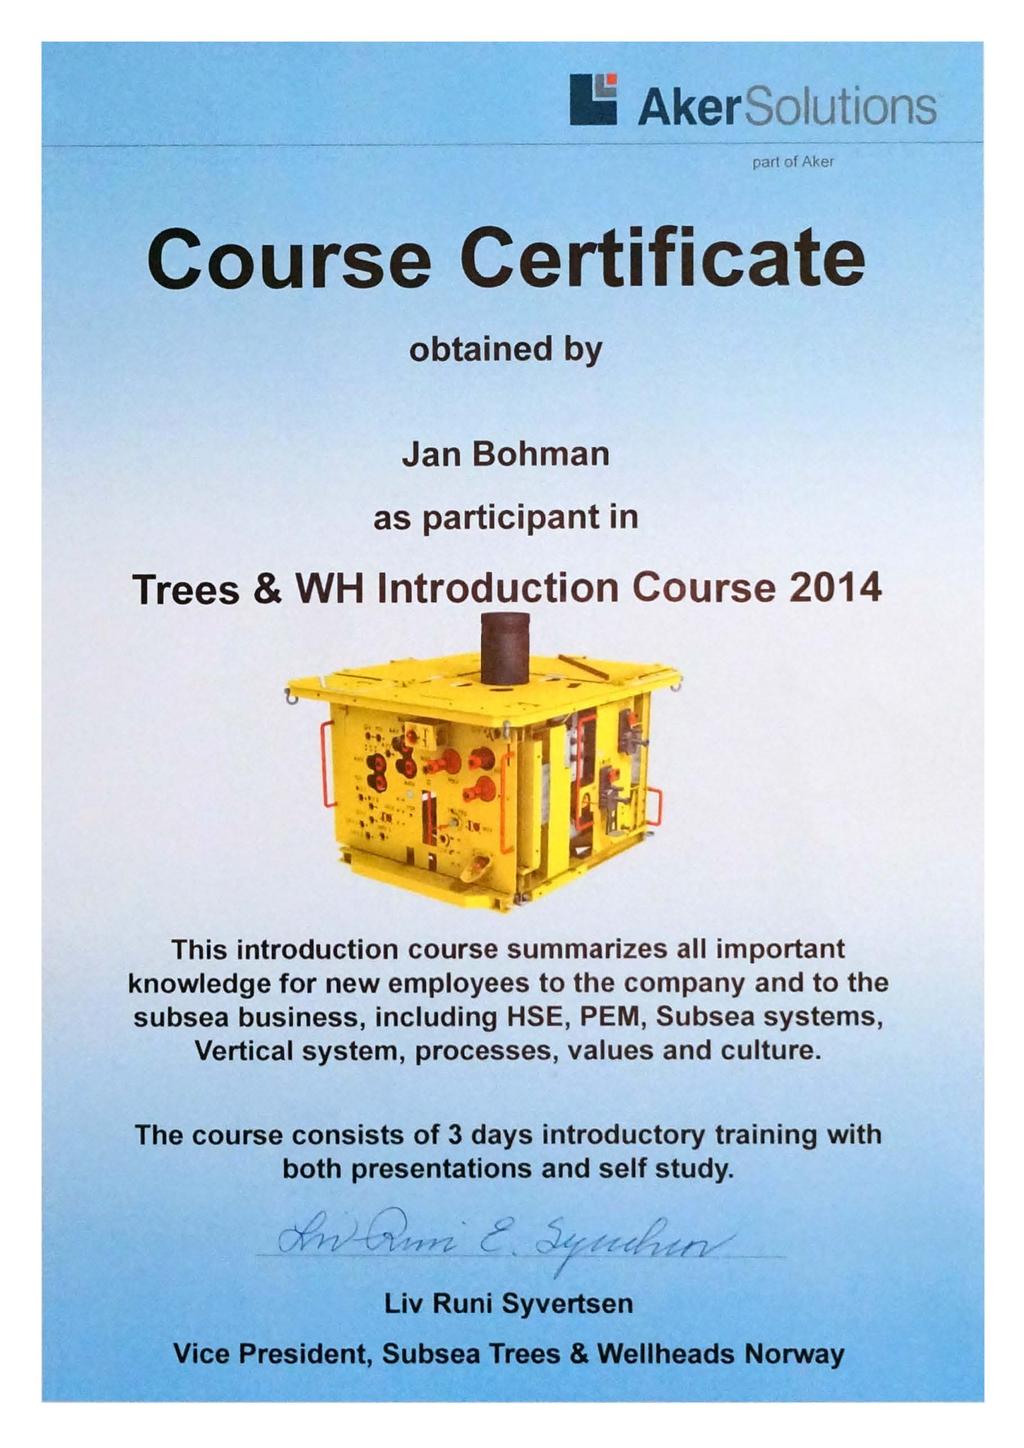 li AkerSolutions part of Aker Course Certificate obtained by Jan Bohman as participant in Trees & WH Introduction Course 2014 This introduction course summarizes all important knowledge for new